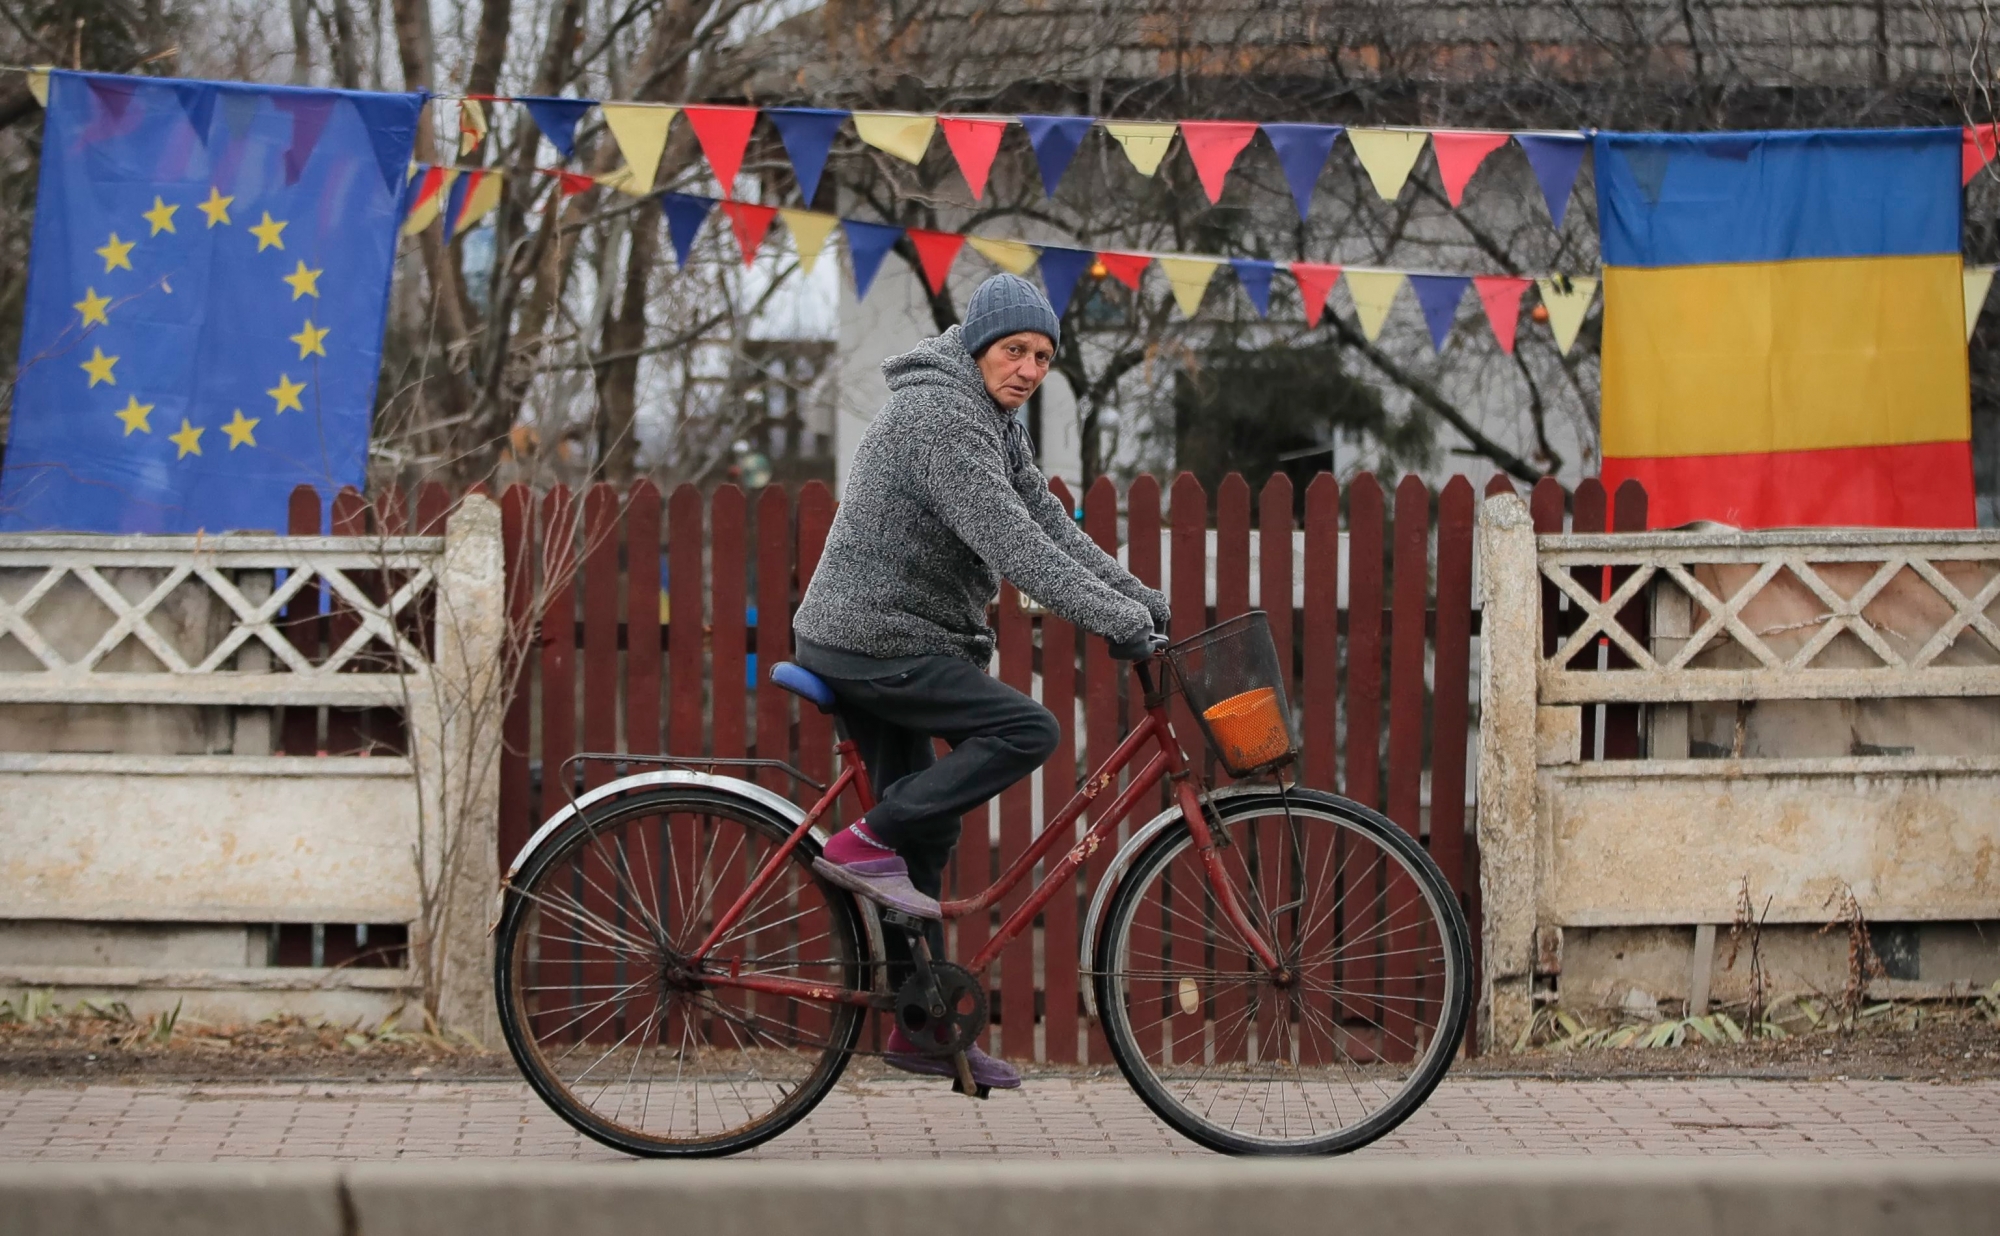 In this Sunday, Dec. 30, 2018, photo a person rides a bicycle by a yard decorated with European Union and Romanian flags in Tartasesti, Romania, two days before the country will take over the EU's rotating presidency. Romanian officials have slammed European Union officials for treating it as "a second-rate" country as it prepares to take over the EU's rotating presidency. (AP Photo/Vadim Ghirda) Romania EU Presidency